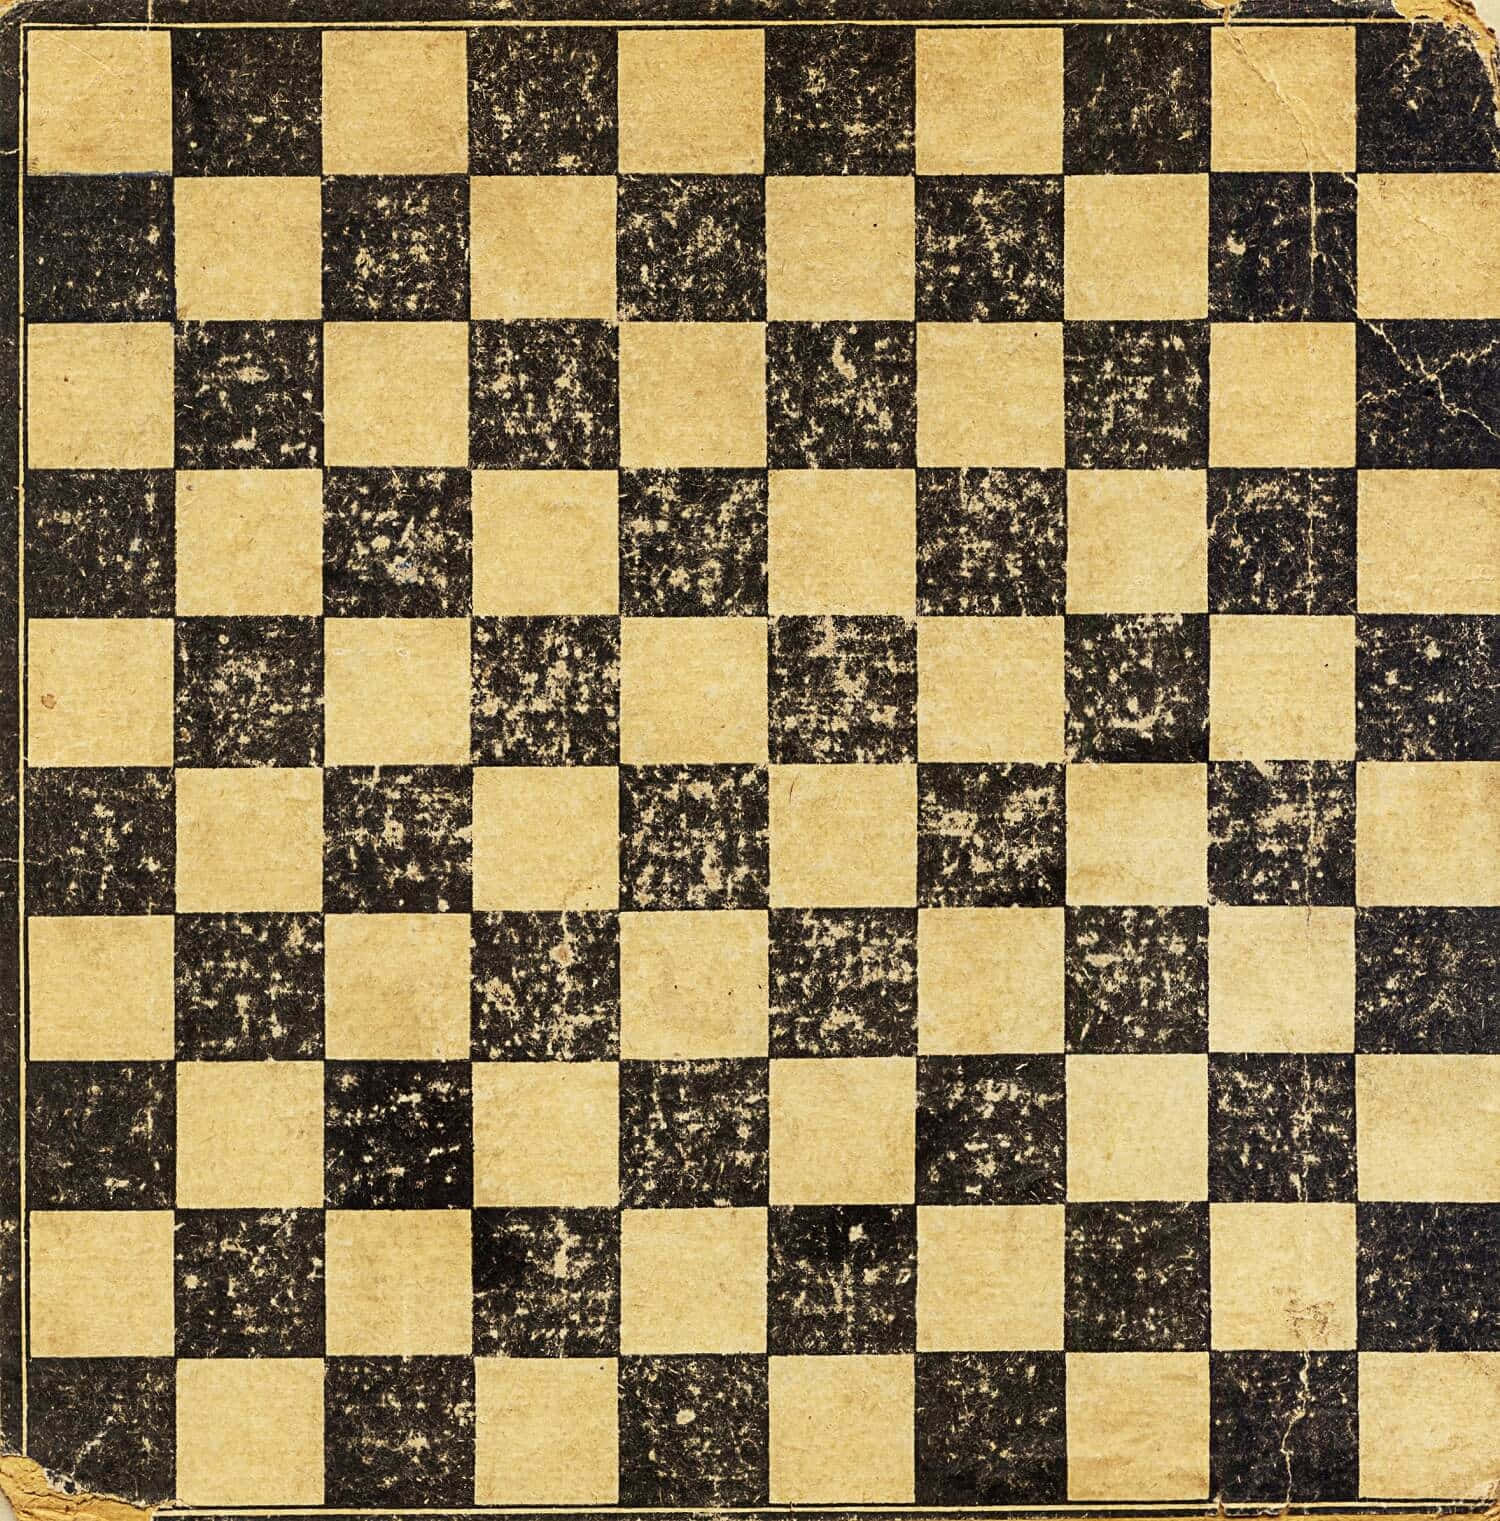 Strategize Your Next Move On A Classic Chessboard